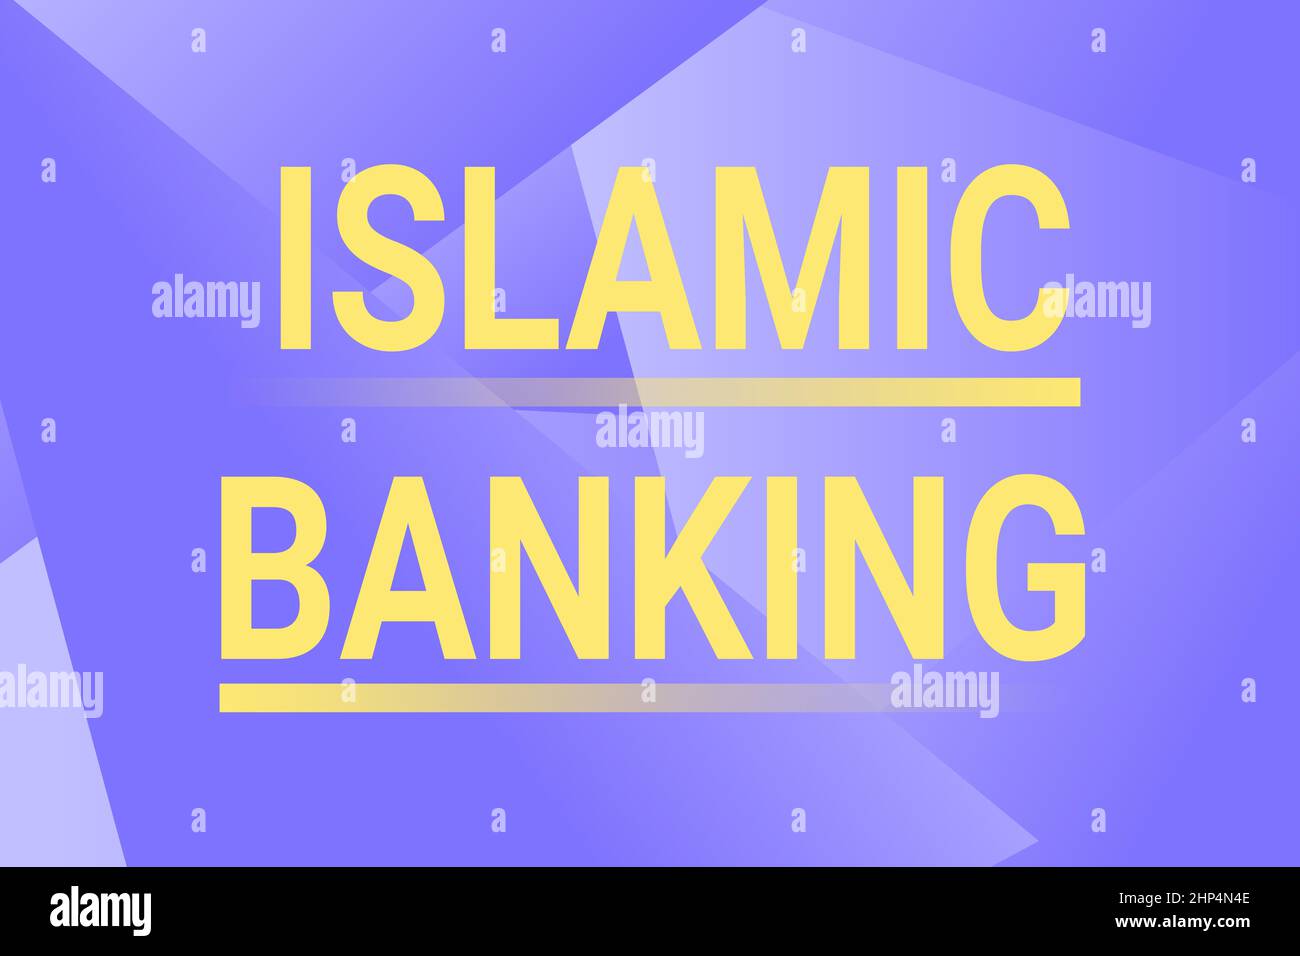 Text sign showing Islamic Banking, Business overview Banking system based on the principles of Islamic law Line Illustrated Backgrounds With Various S Stock Photo